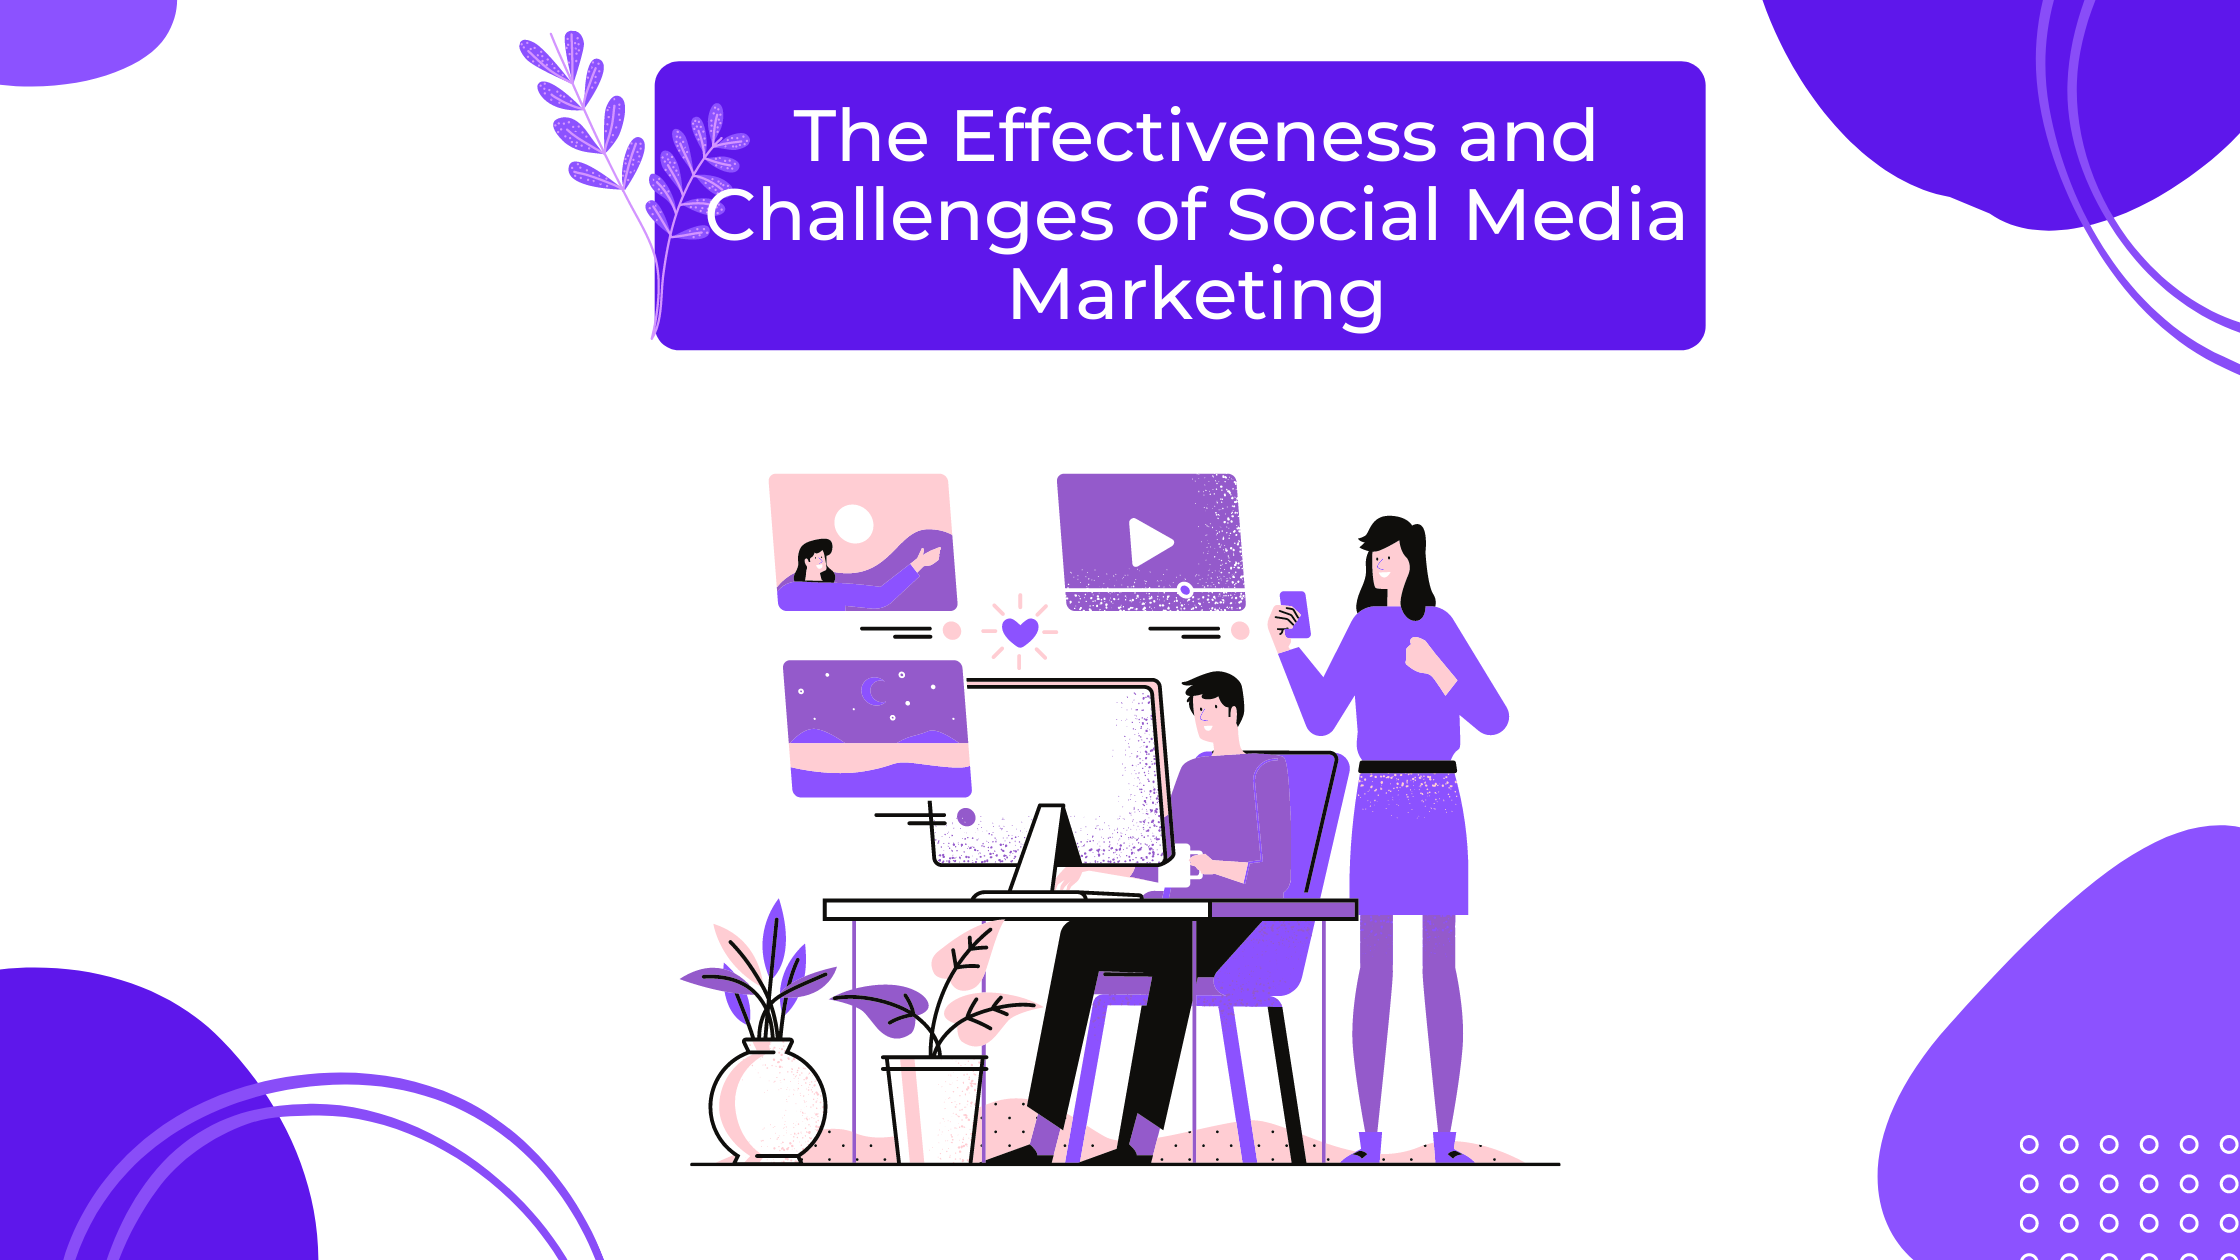 The effectiveness and challenges of social media marketing